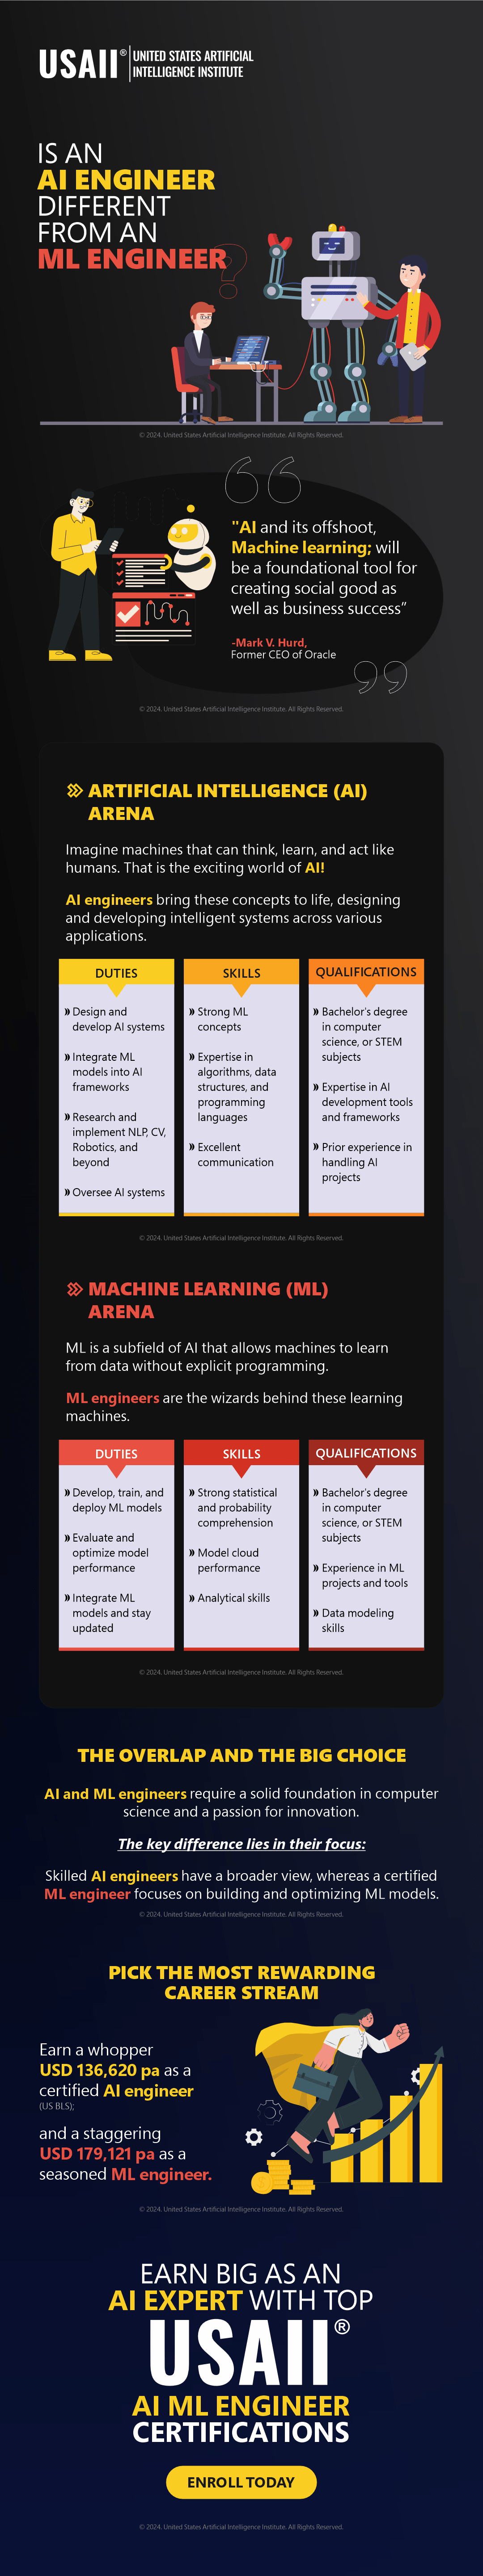 Is an AI Engineer Different From an ML Engineer?